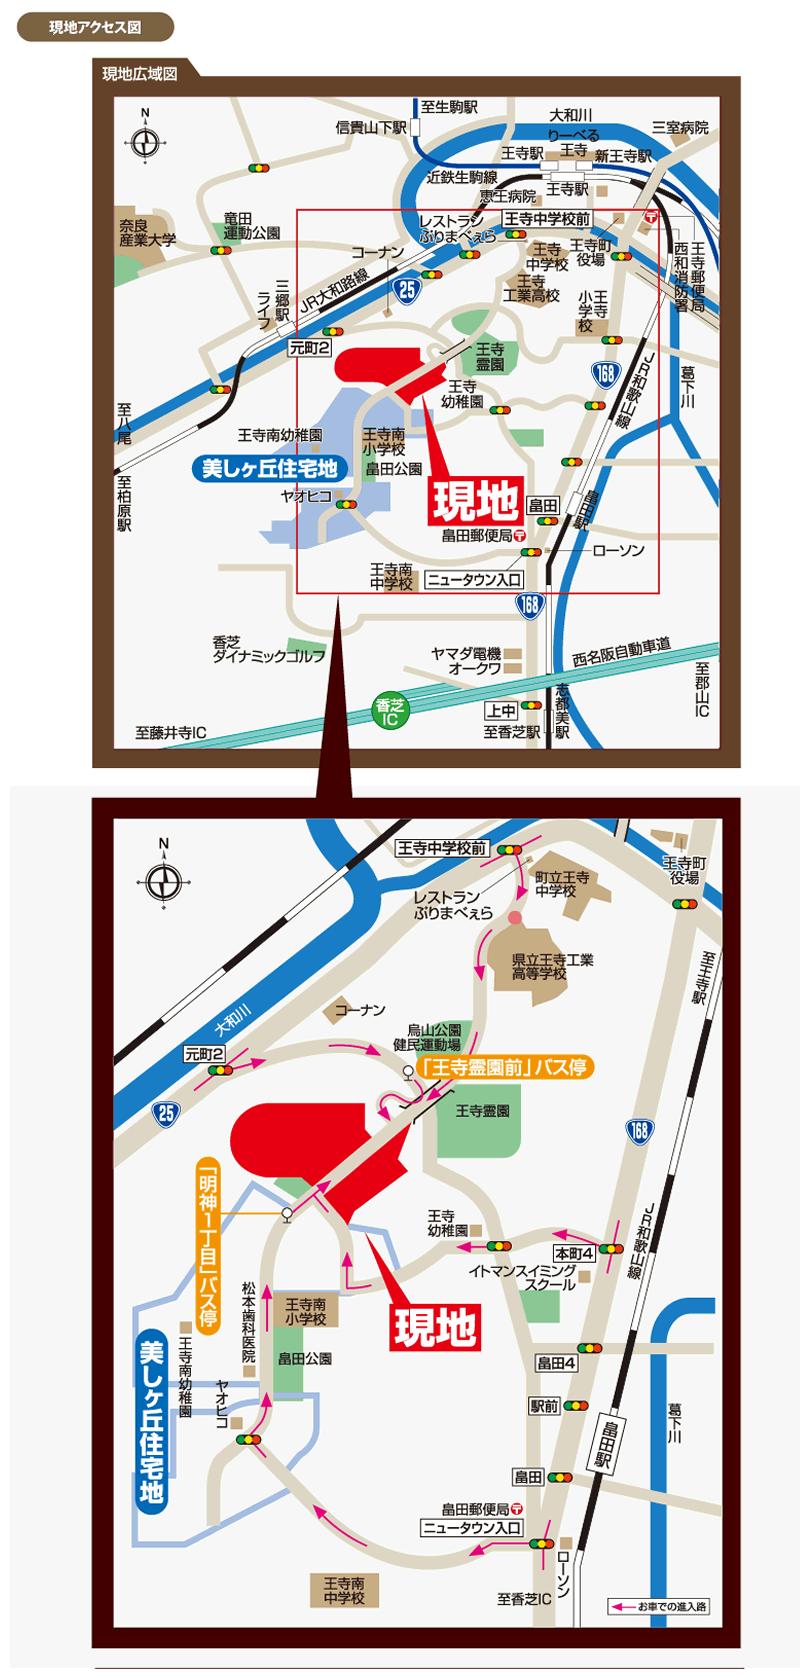 Local guide map. 14 minutes from the "one-chome Myojin" bus stop also bus utilization access to the nearest JR "Oji" station, Convenience and 10 minutes from the "Oji Reienmae" bus stop. 're Also around the living facilities, It is rich location of that corner may environment are aligned.